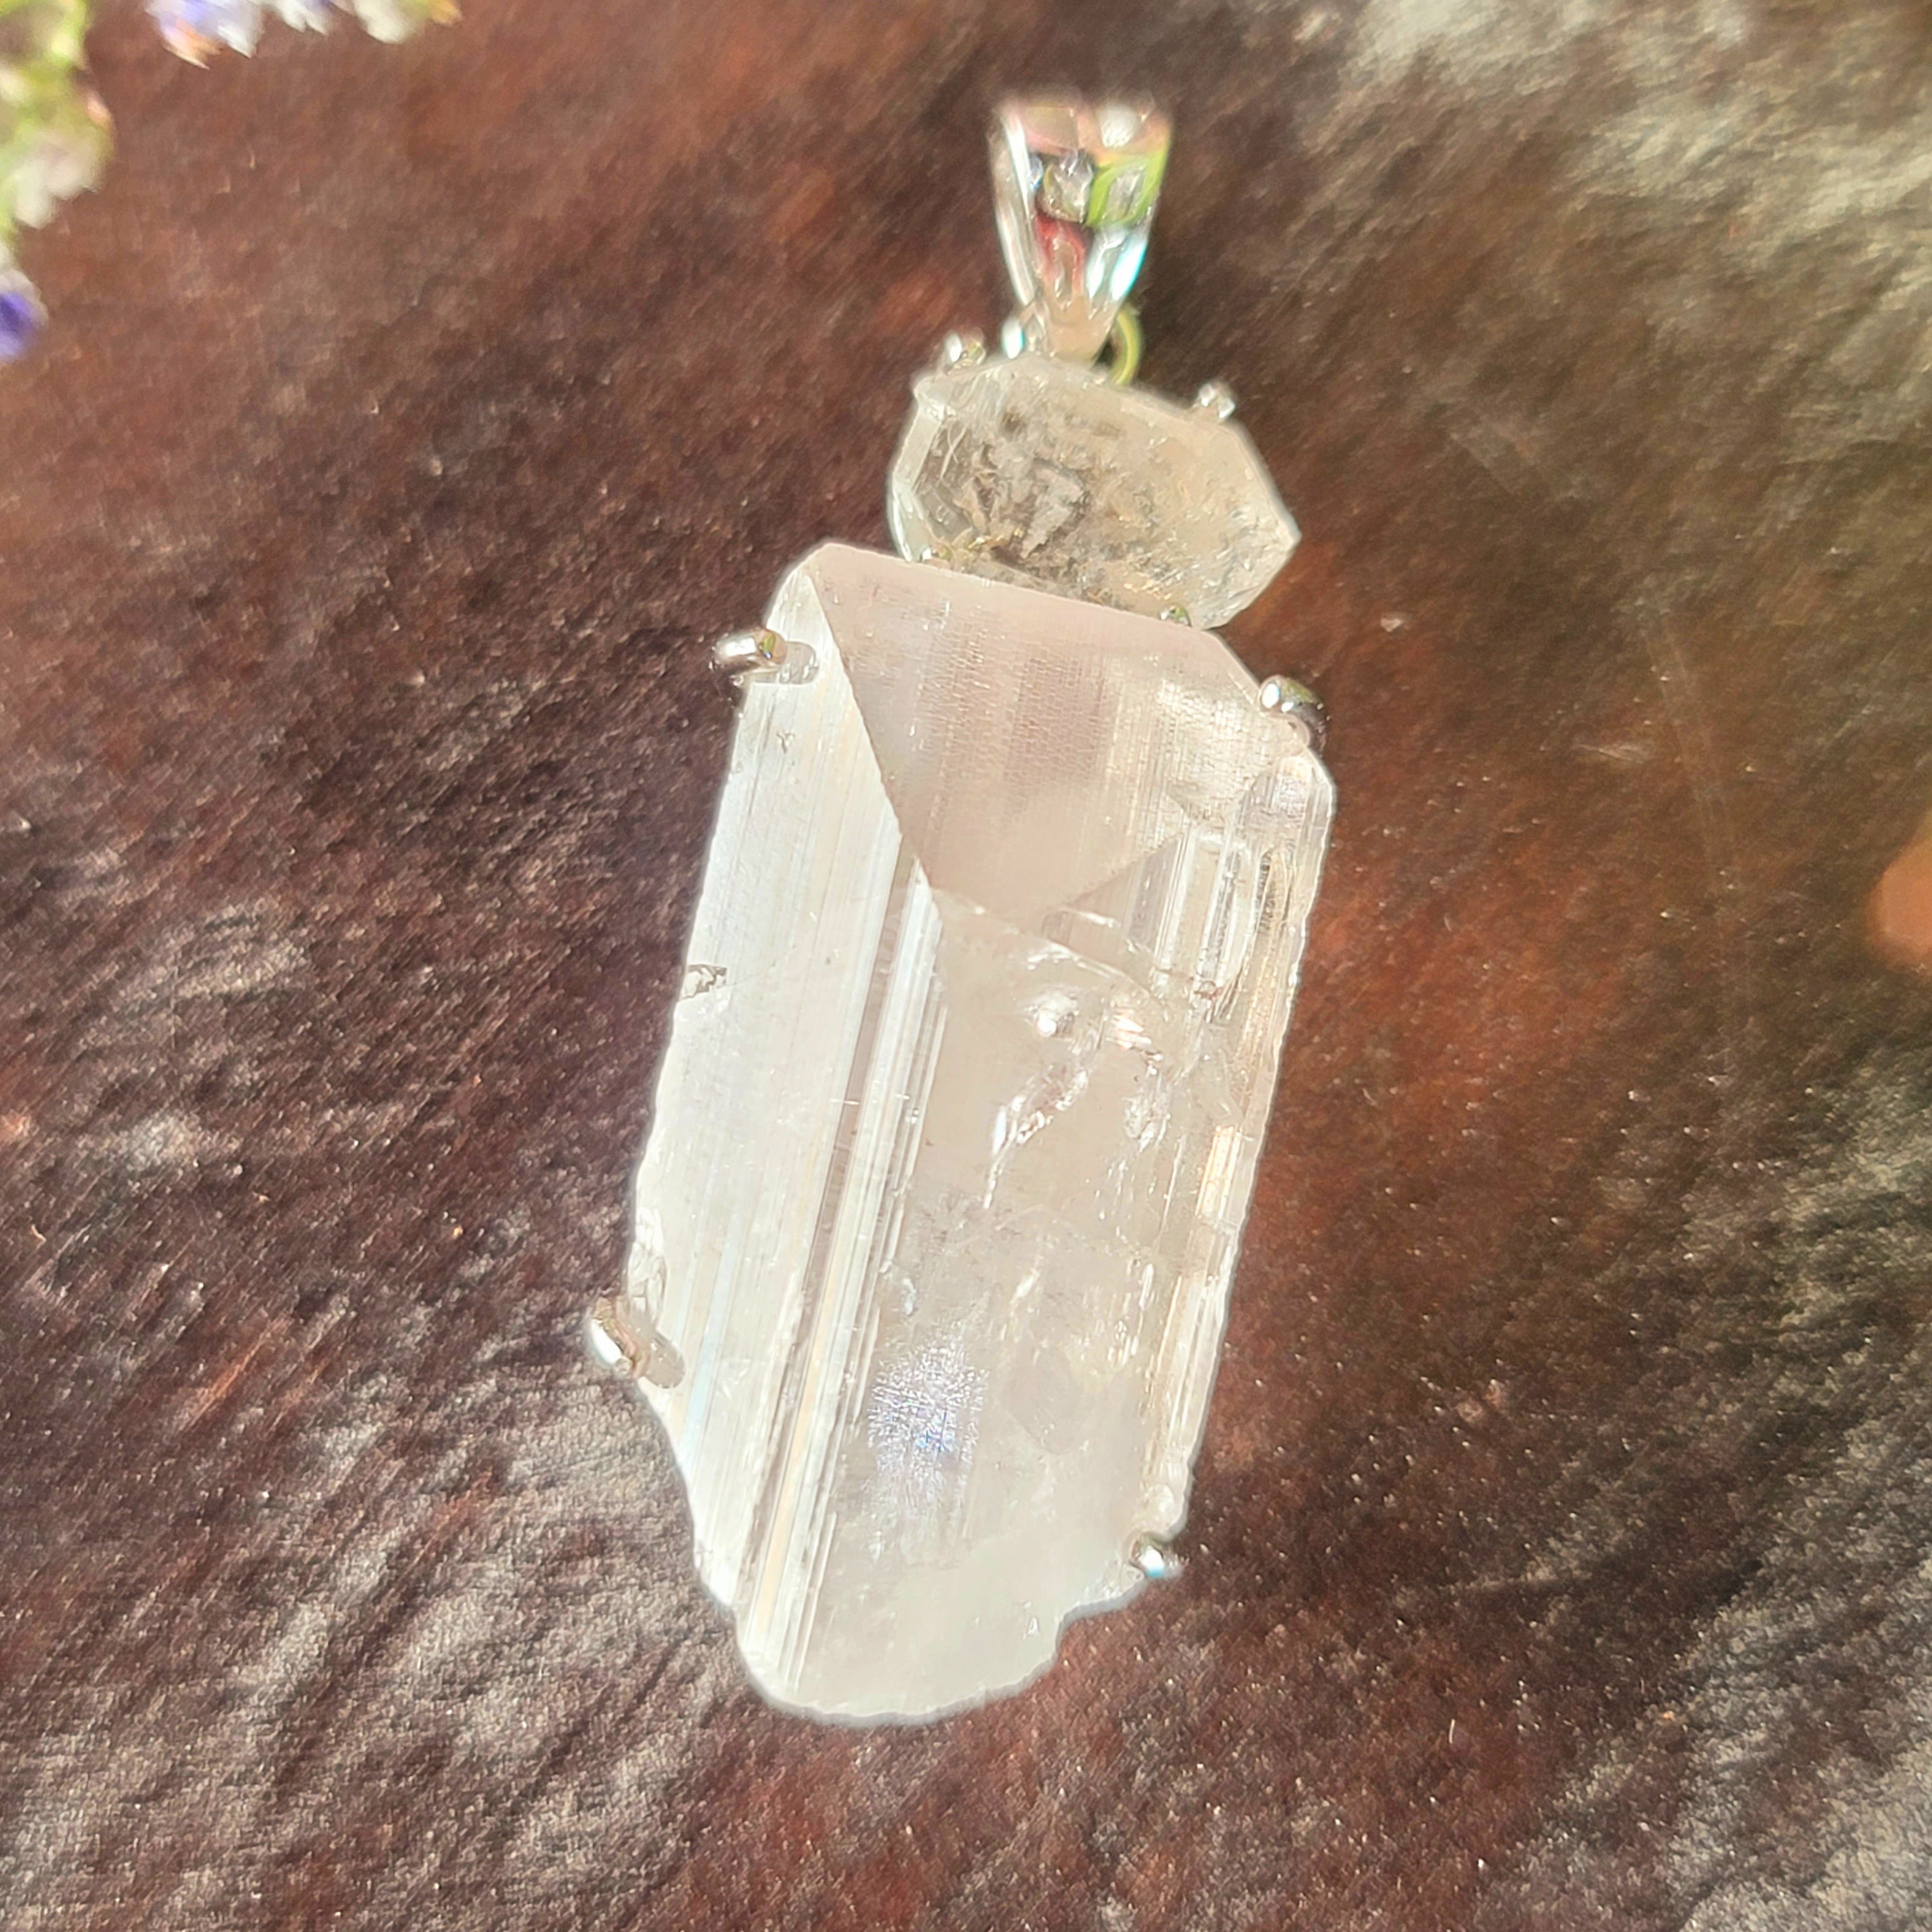 Danburite x Herkimer Diamond Pendant .925 Silver for Connection with Higher Realms, Peace and Self Acceptance